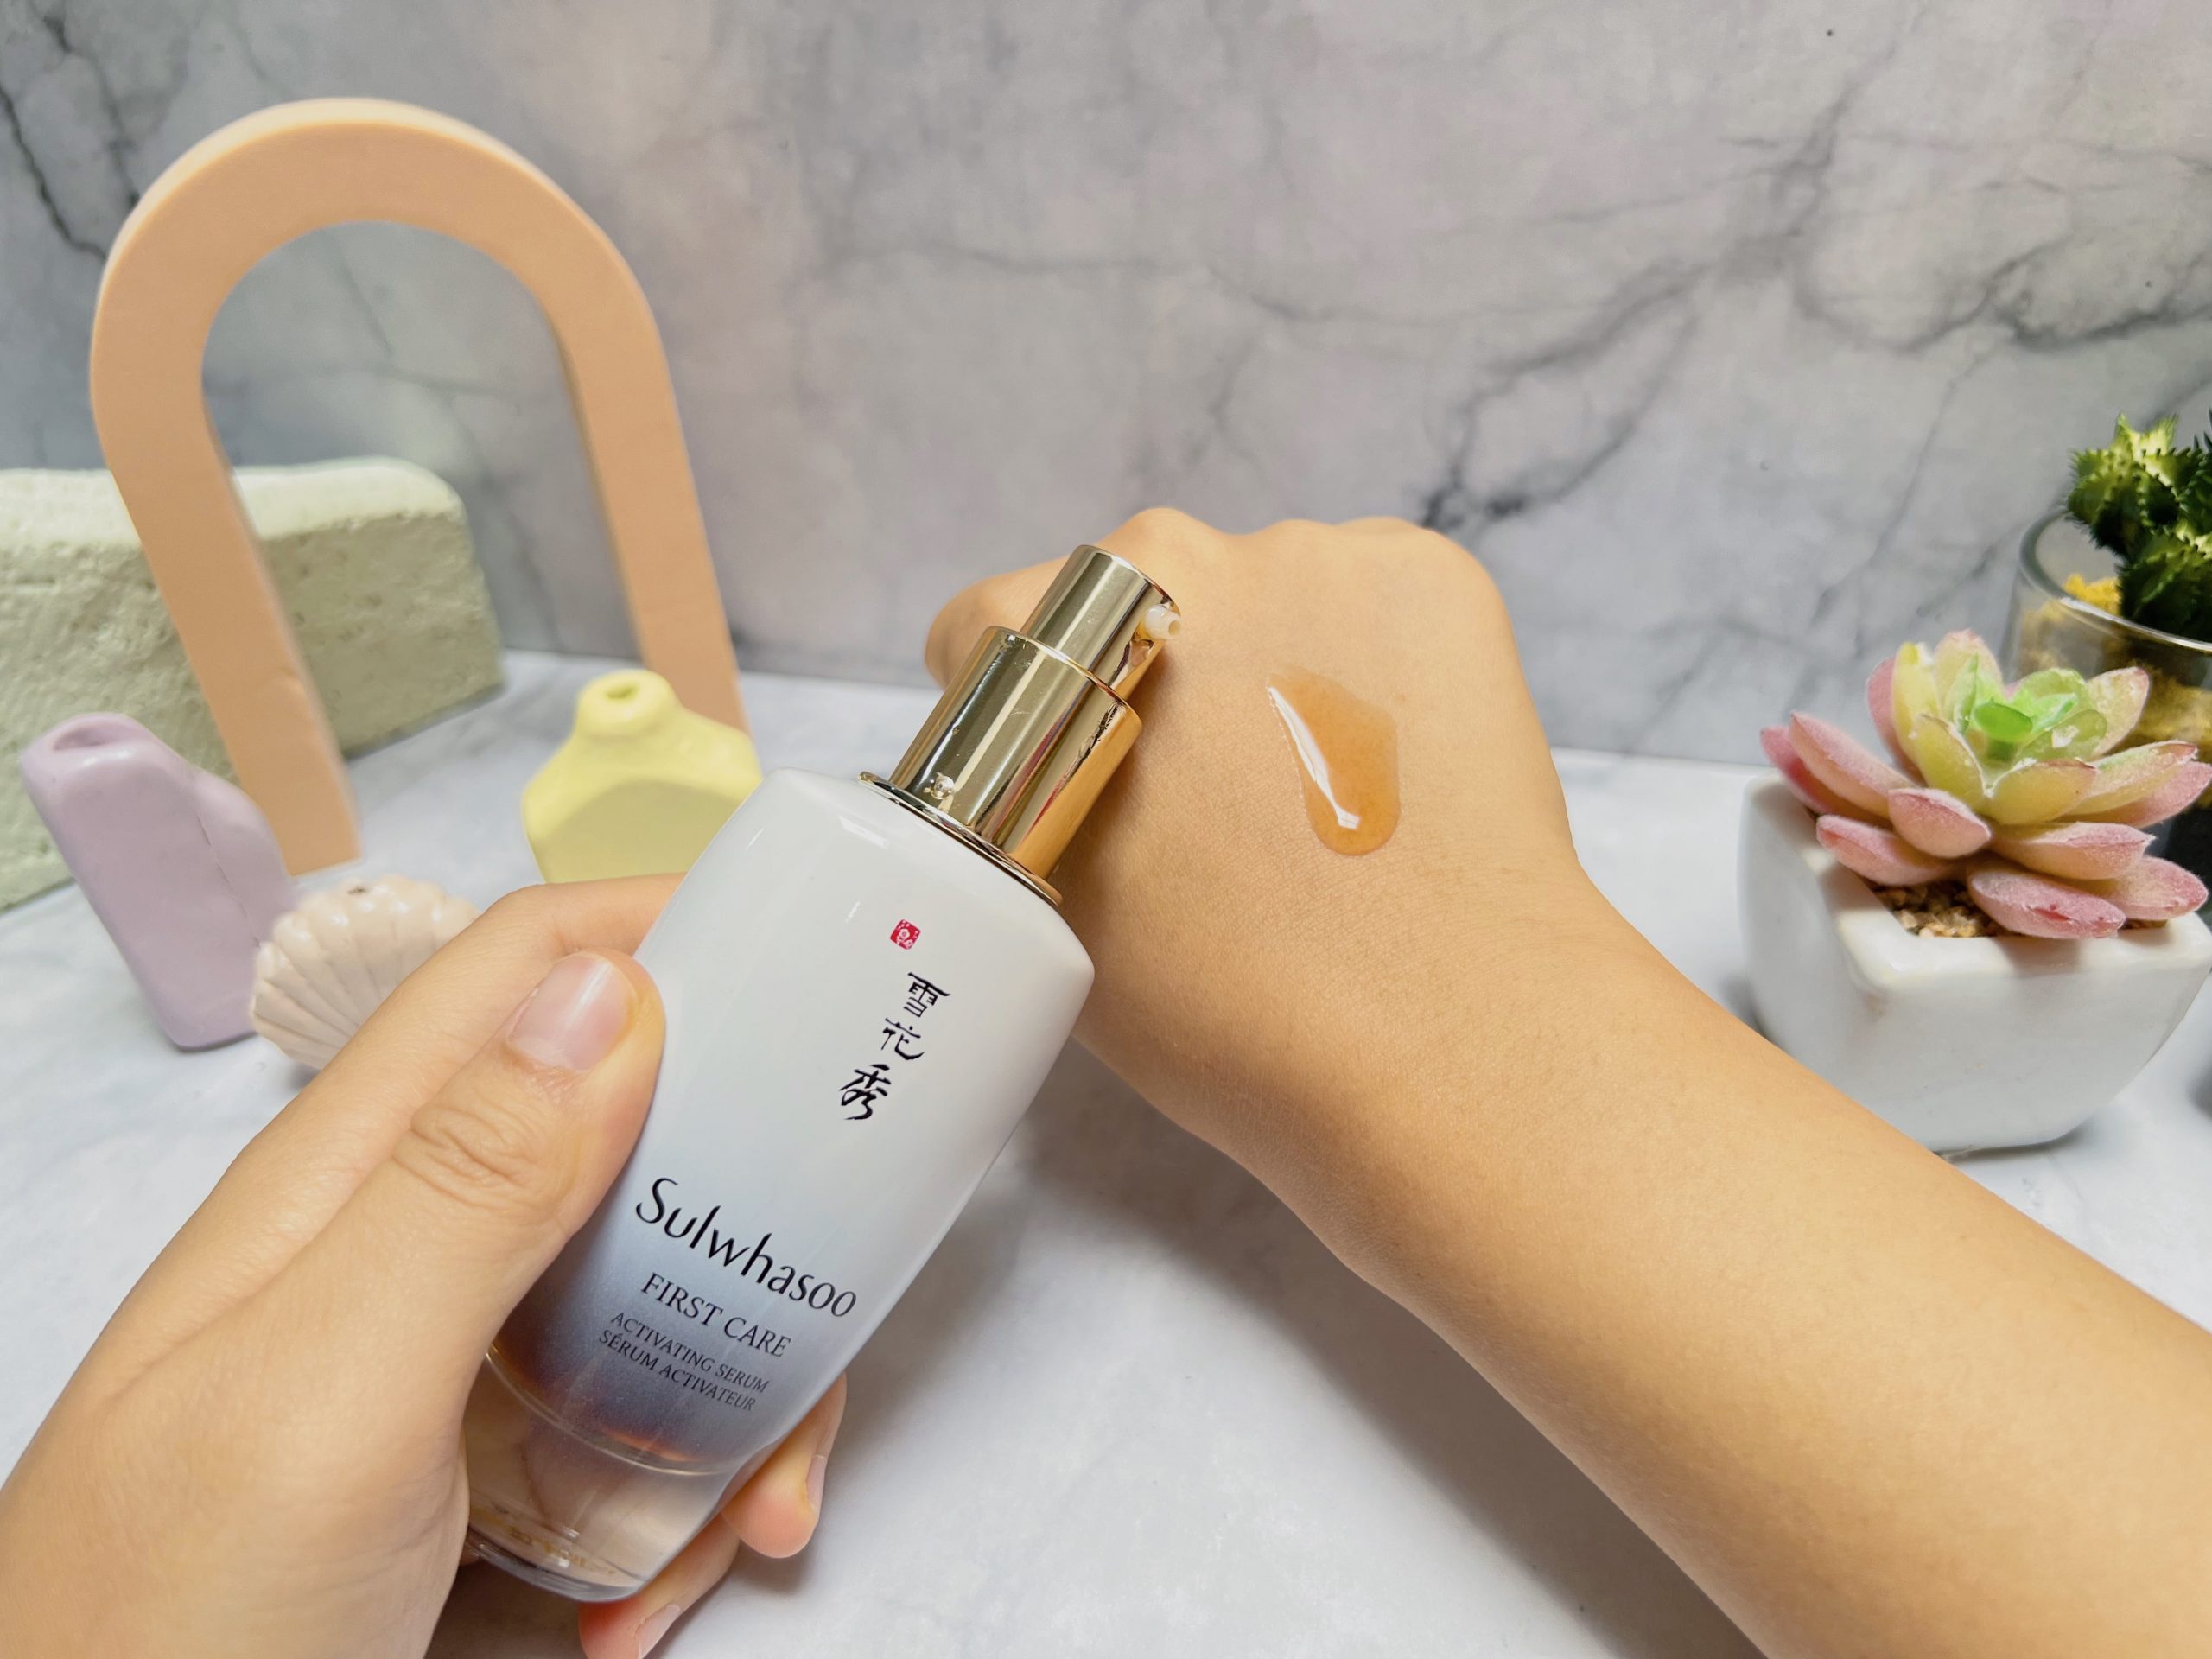 Review Sulwhasoo First Care Activating Serum